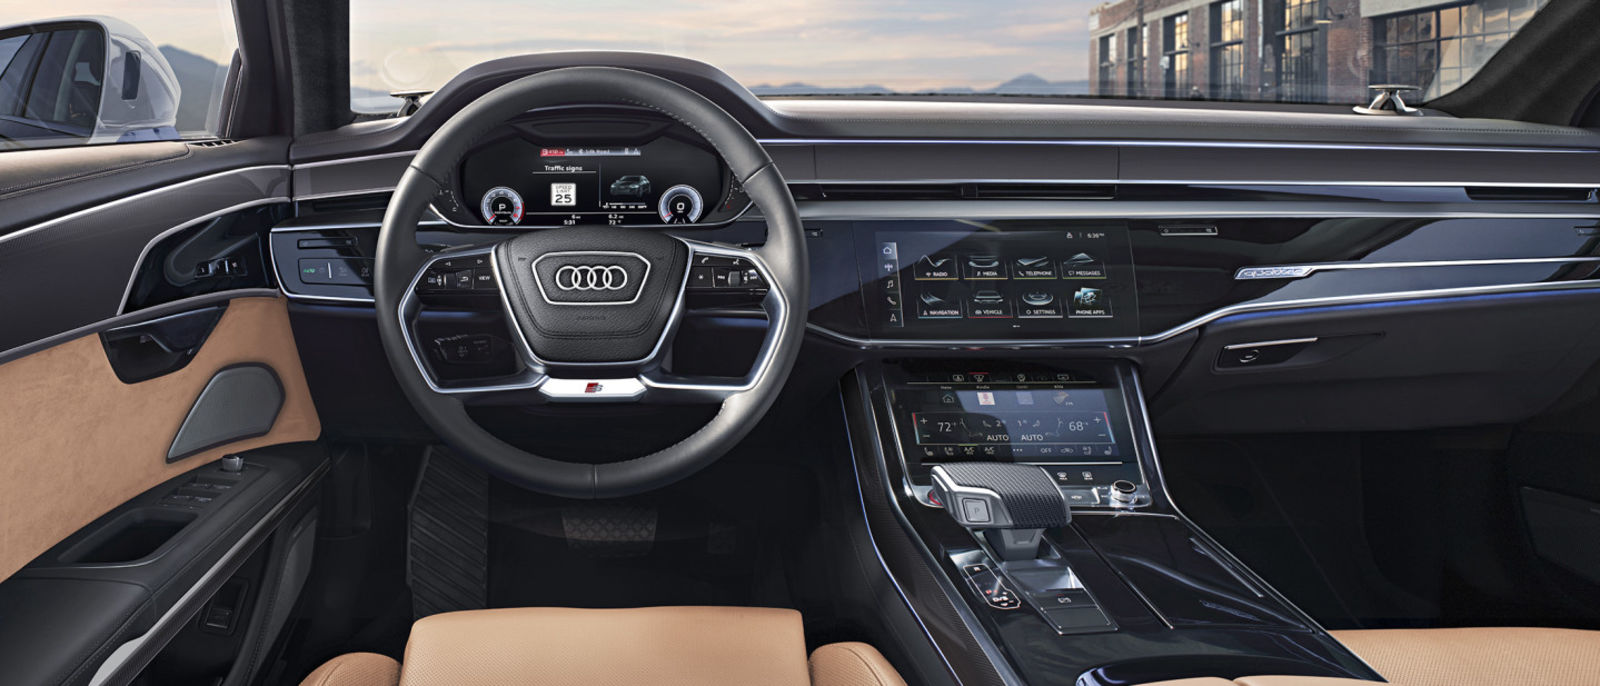 Illustration for article titled The 2020 Audi S8 starts at $129,500